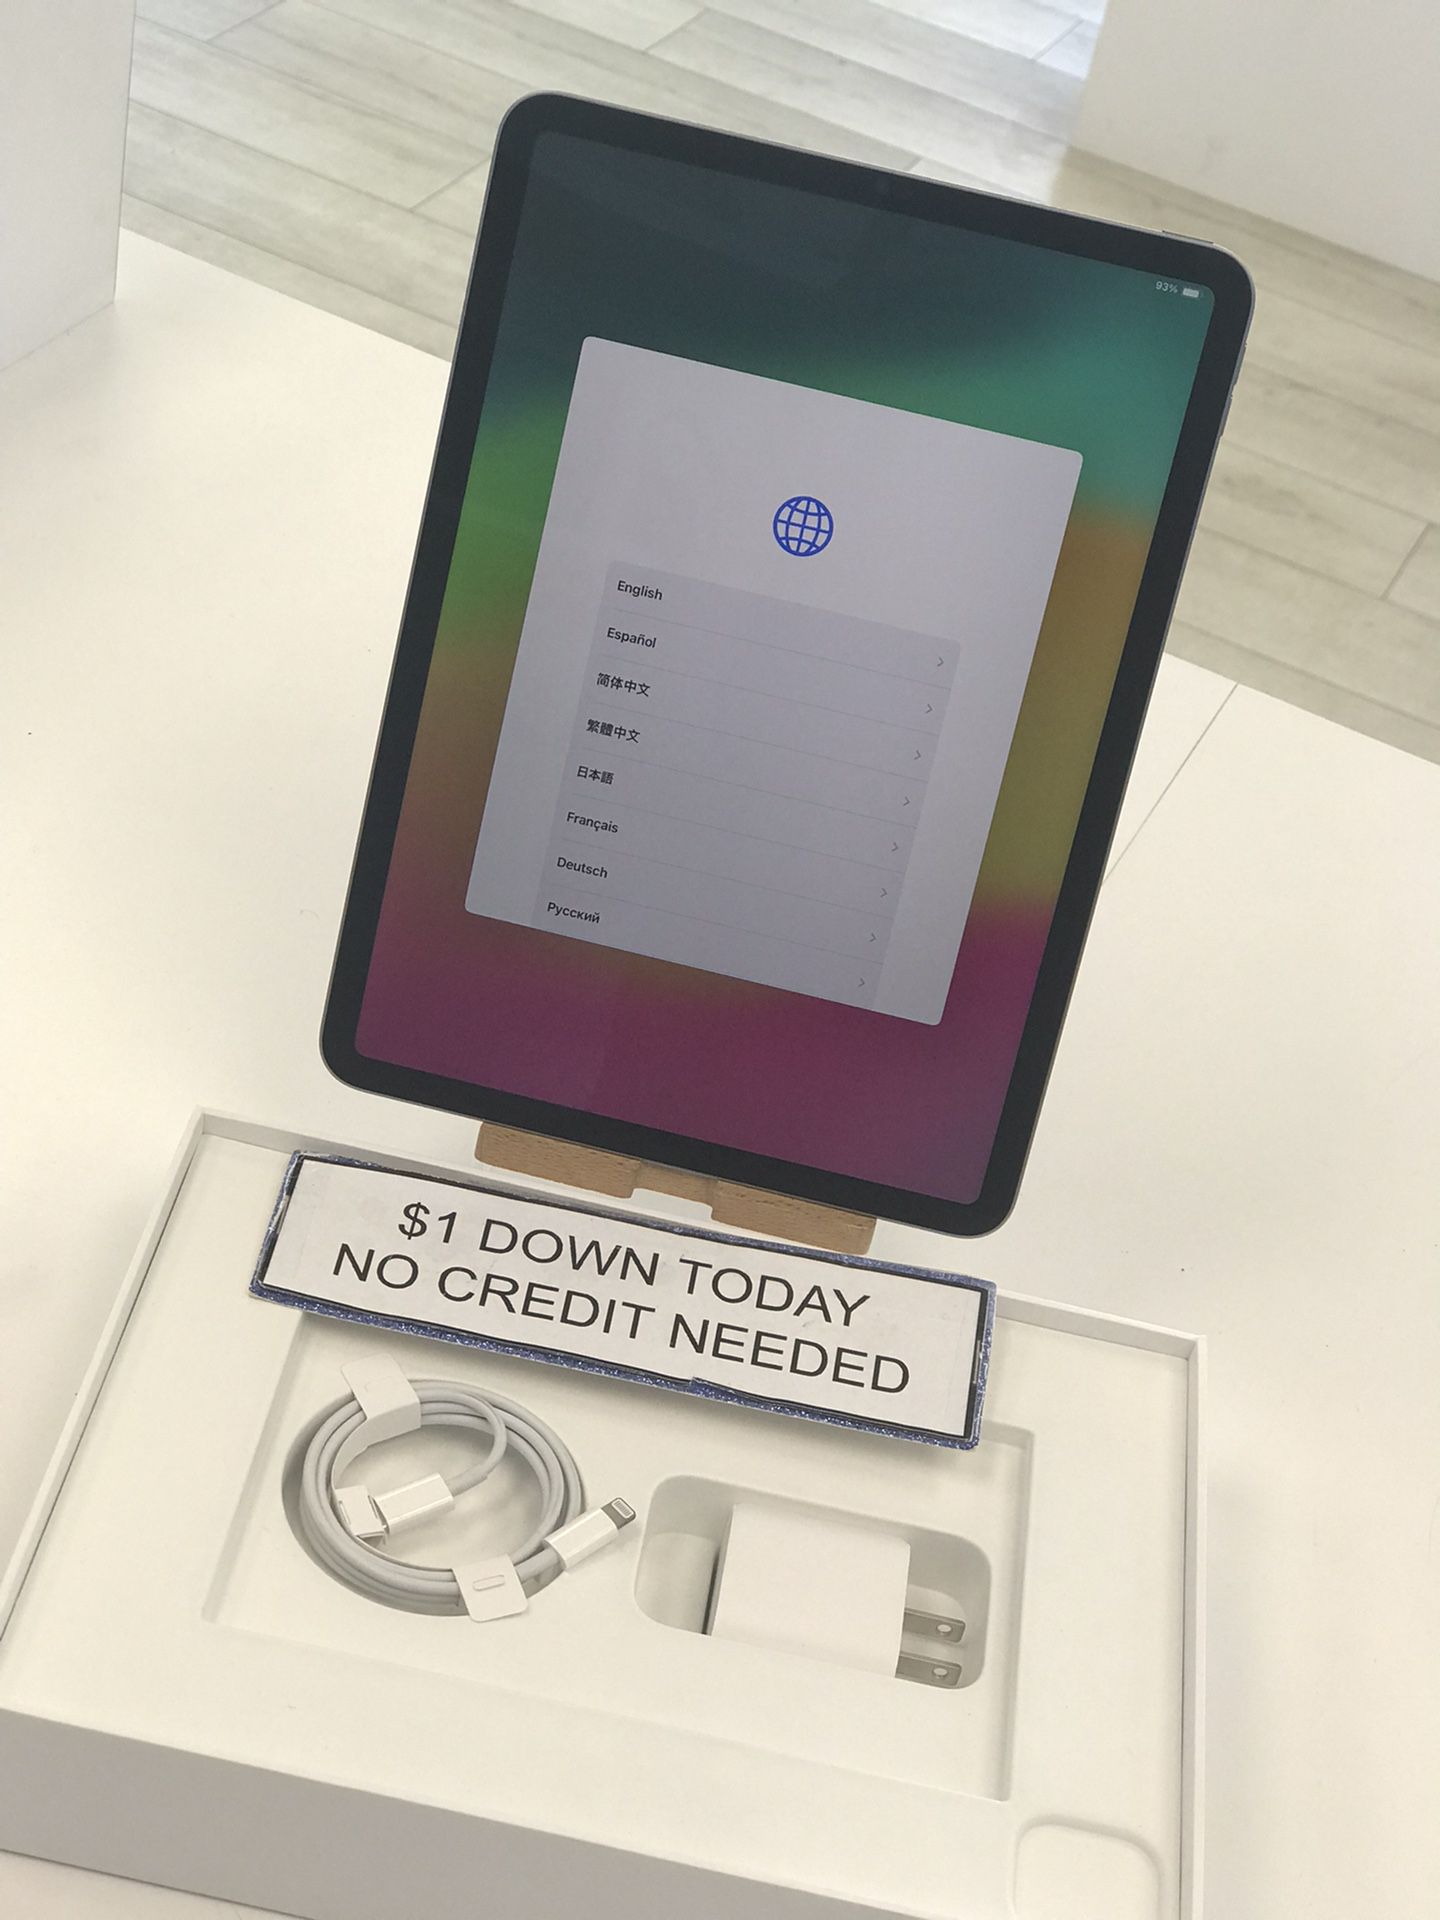 NEW iPad Pro 4th Generation - Pay $1 Today to Take it Home and Pay the Rest Later!